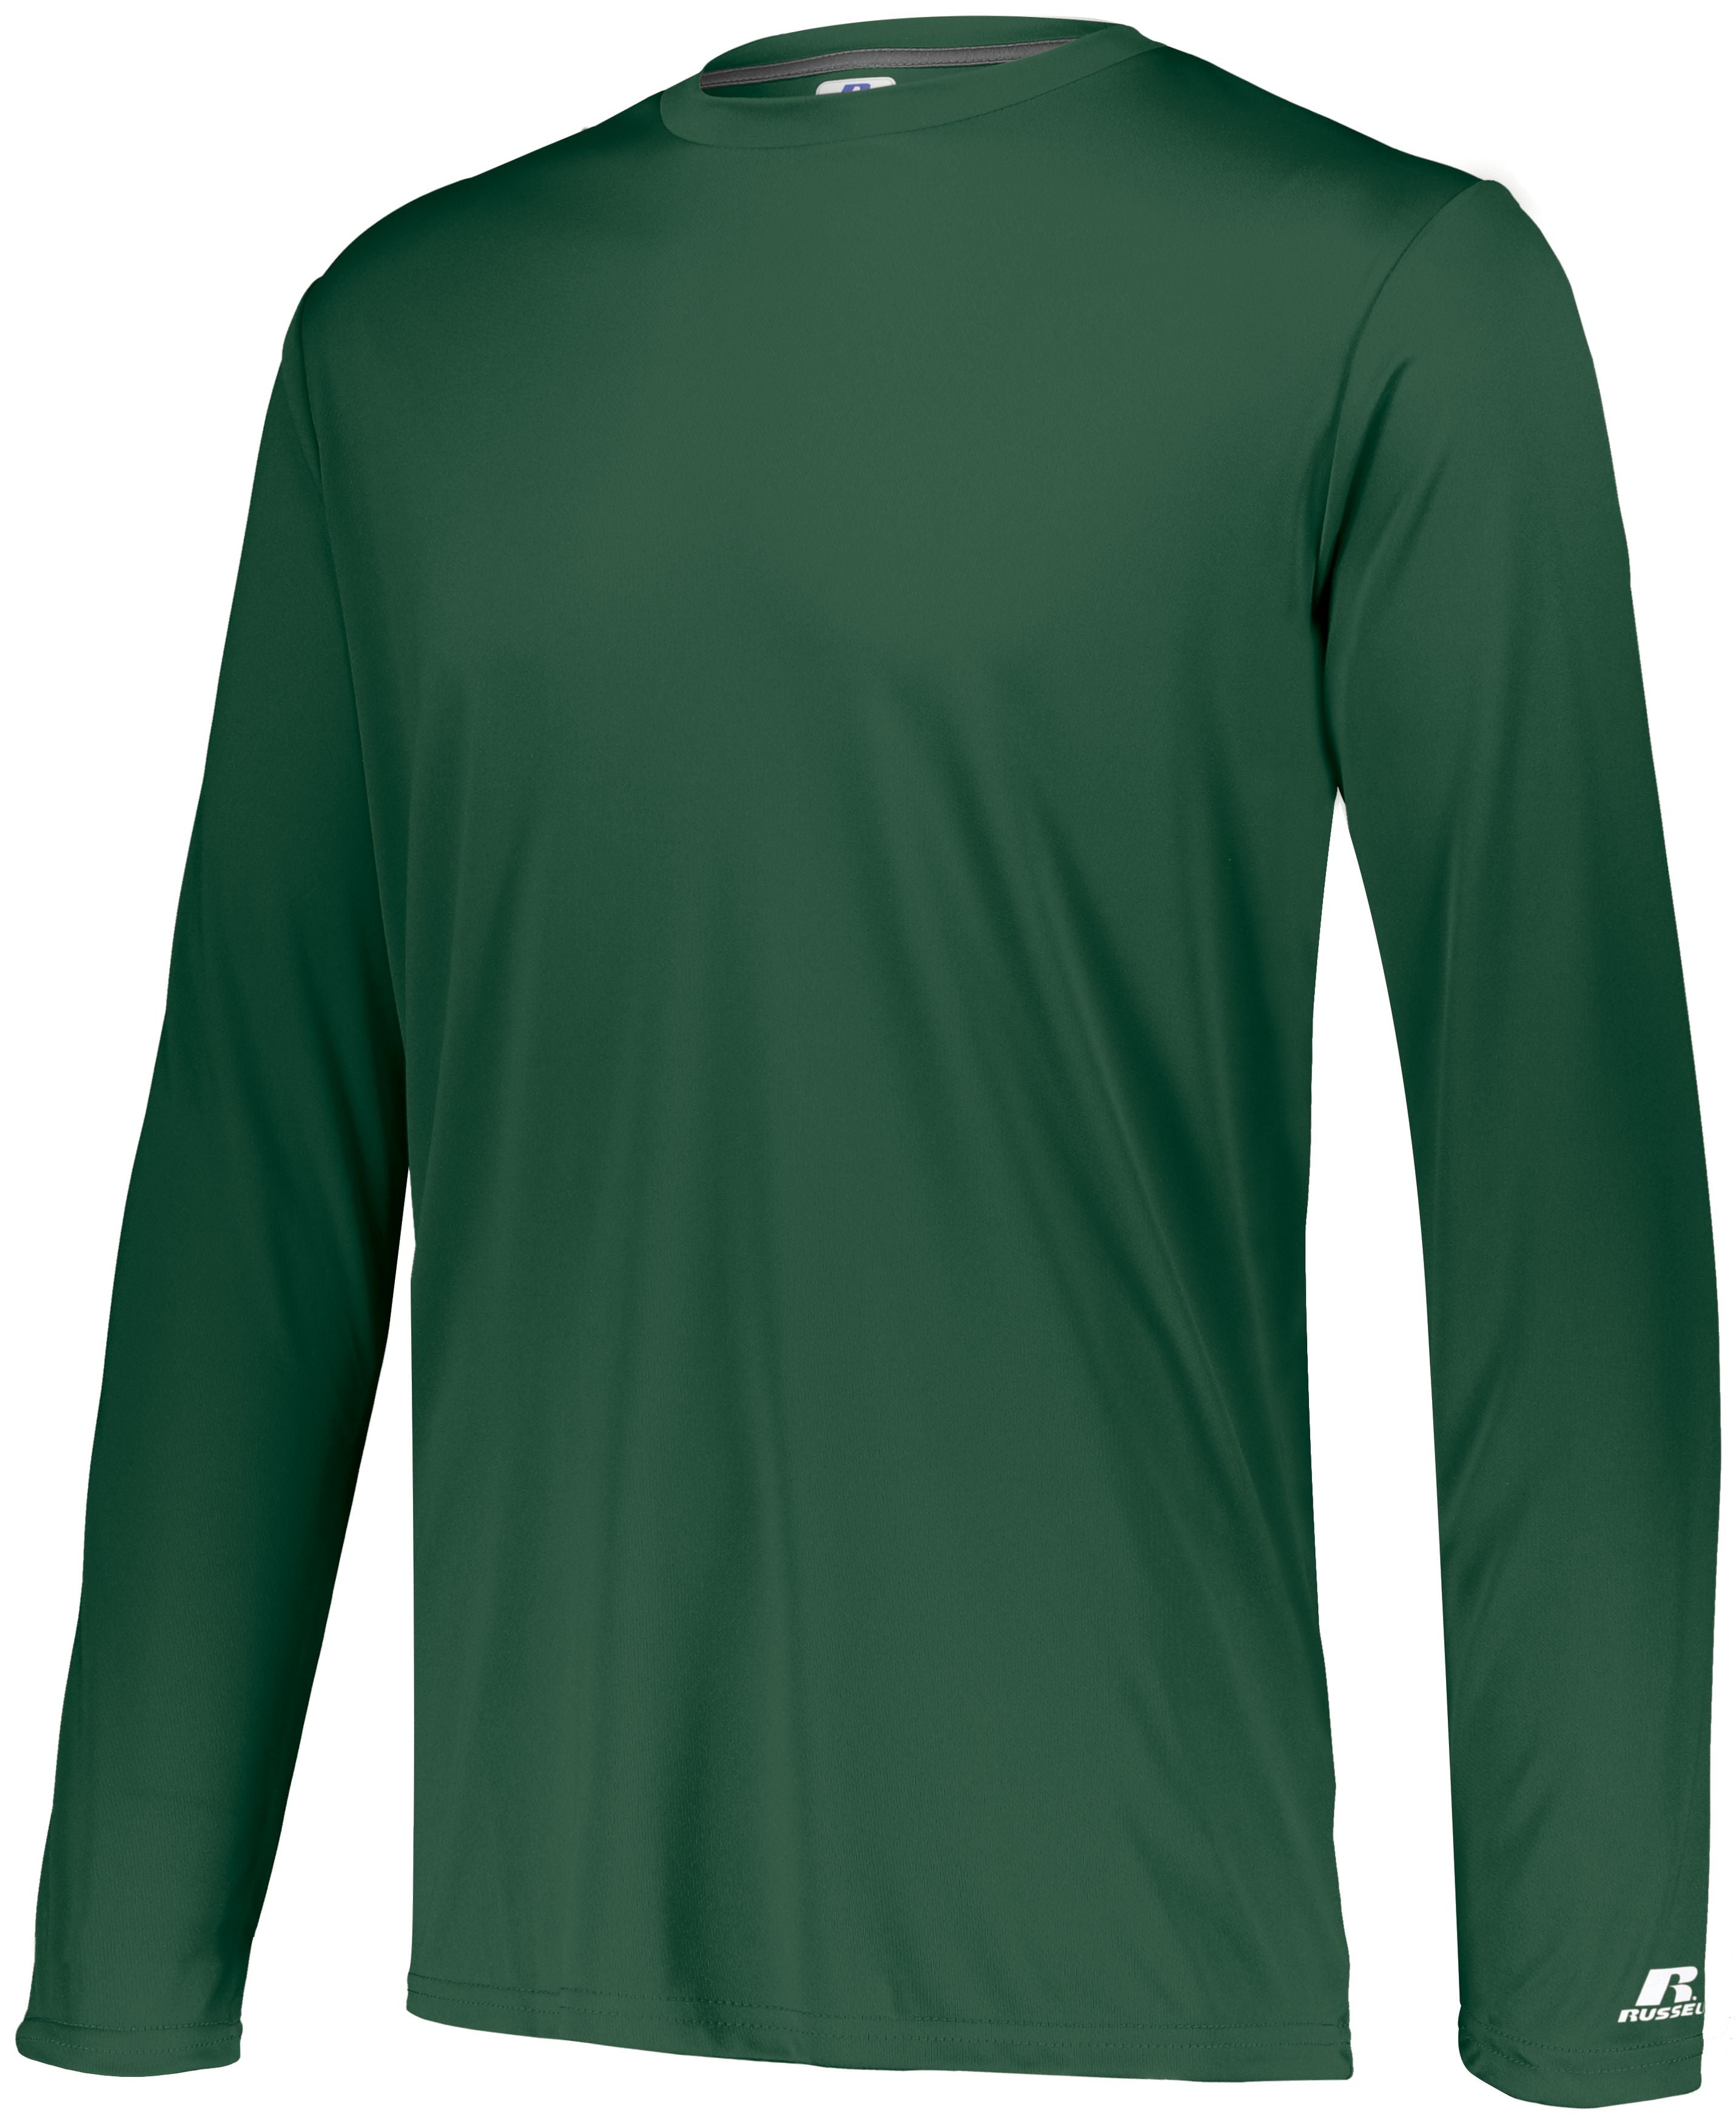 Russell Athletic Dri-Power Core Performance Long Sleeve Tee in Dark Green  -Part of the Adult, Adult-Tee-Shirt, T-Shirts, Russell-Athletic-Products, Shirts product lines at KanaleyCreations.com